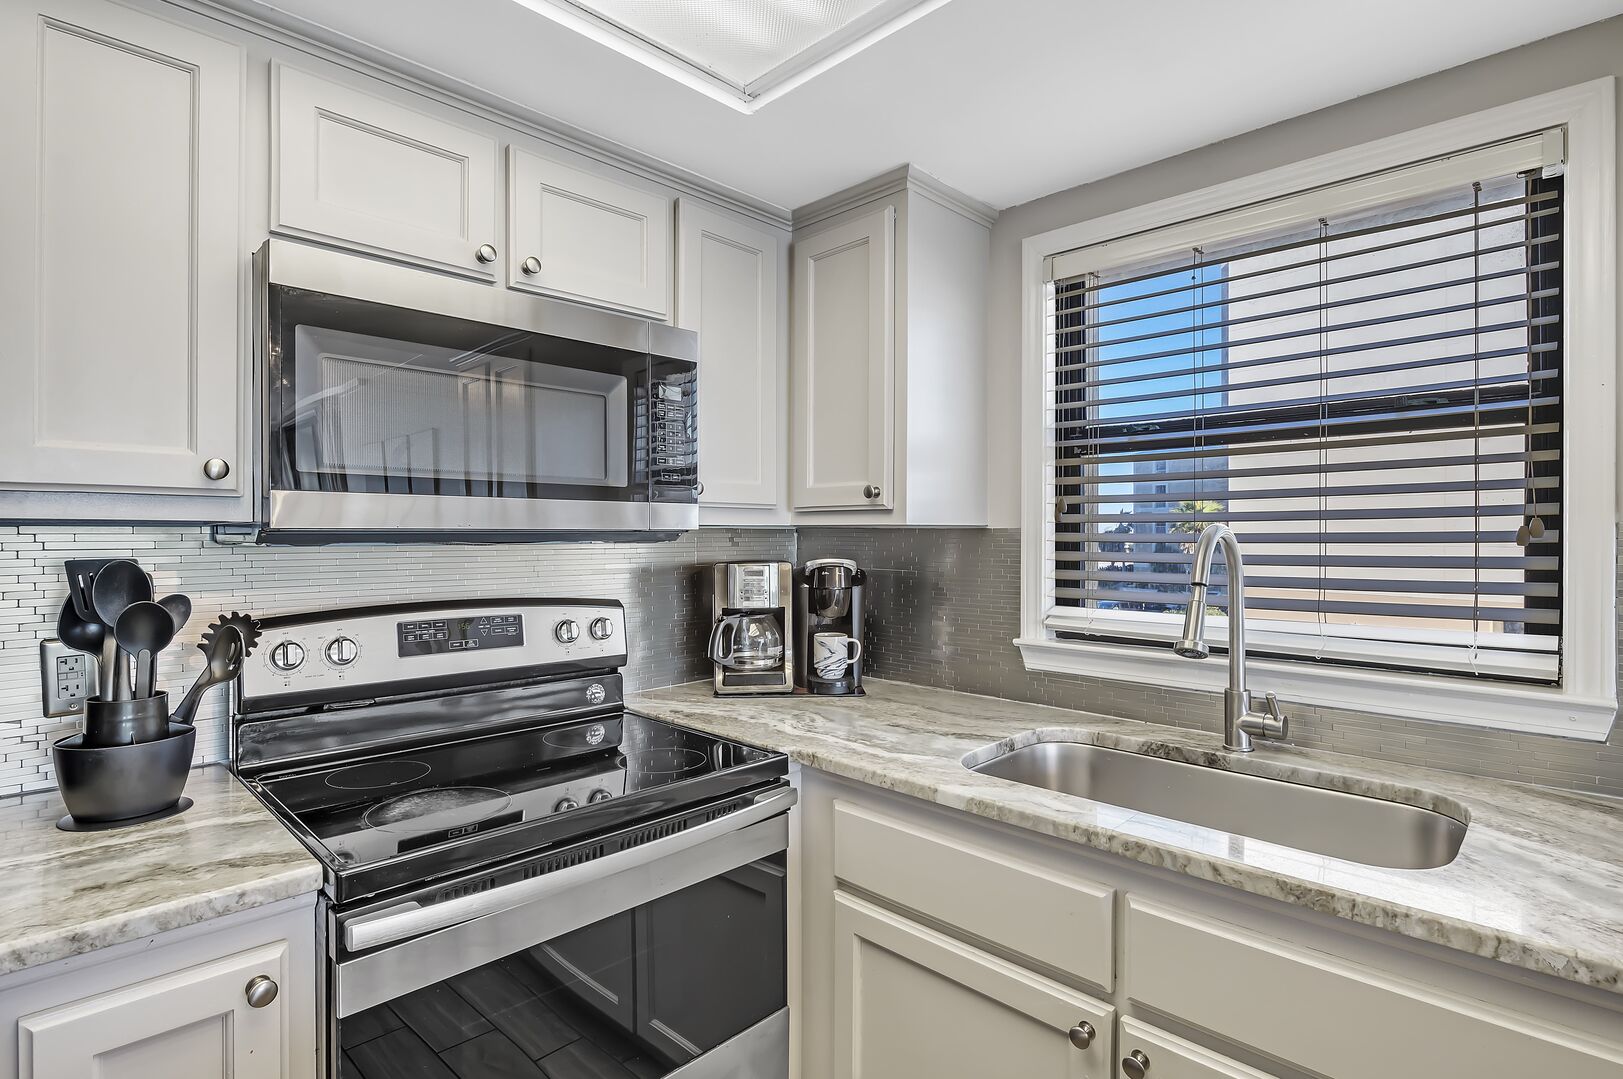 The fully equipped kitchen with stainless appliances and granite counter tops.